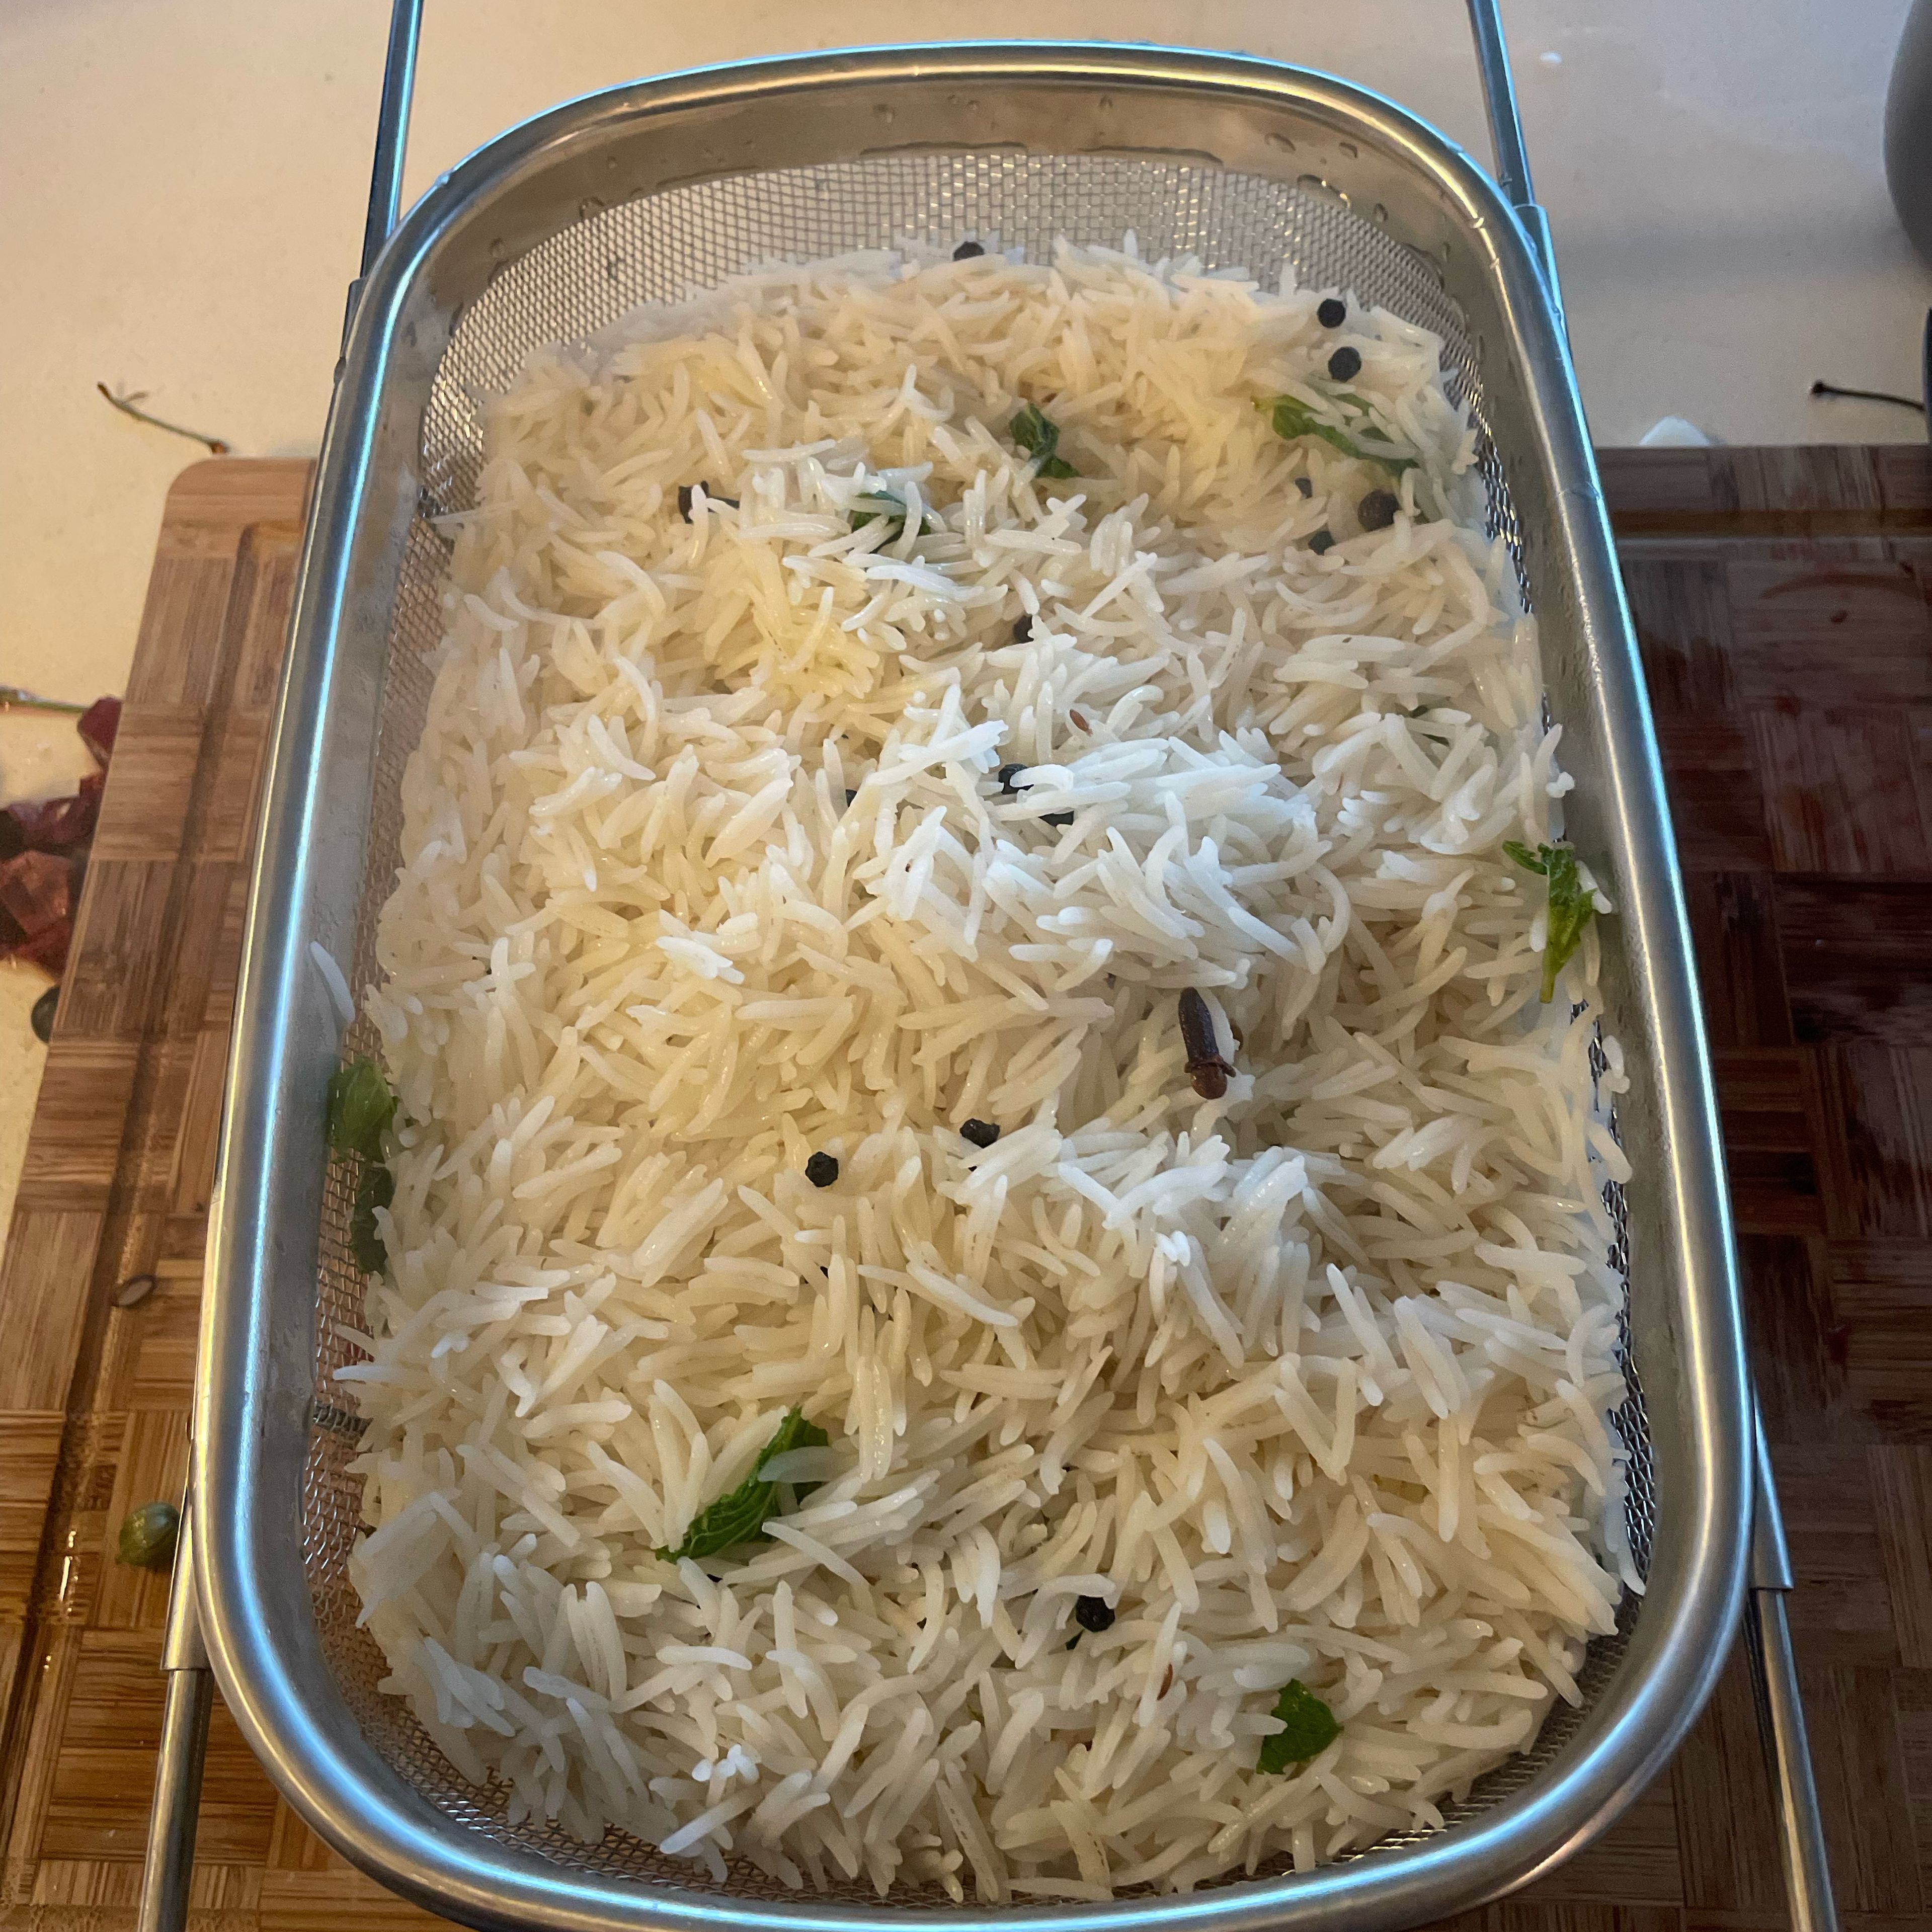 Drain out the water from the rice using a colander, when 80% cooked. This will ensure rice is not overcooked.